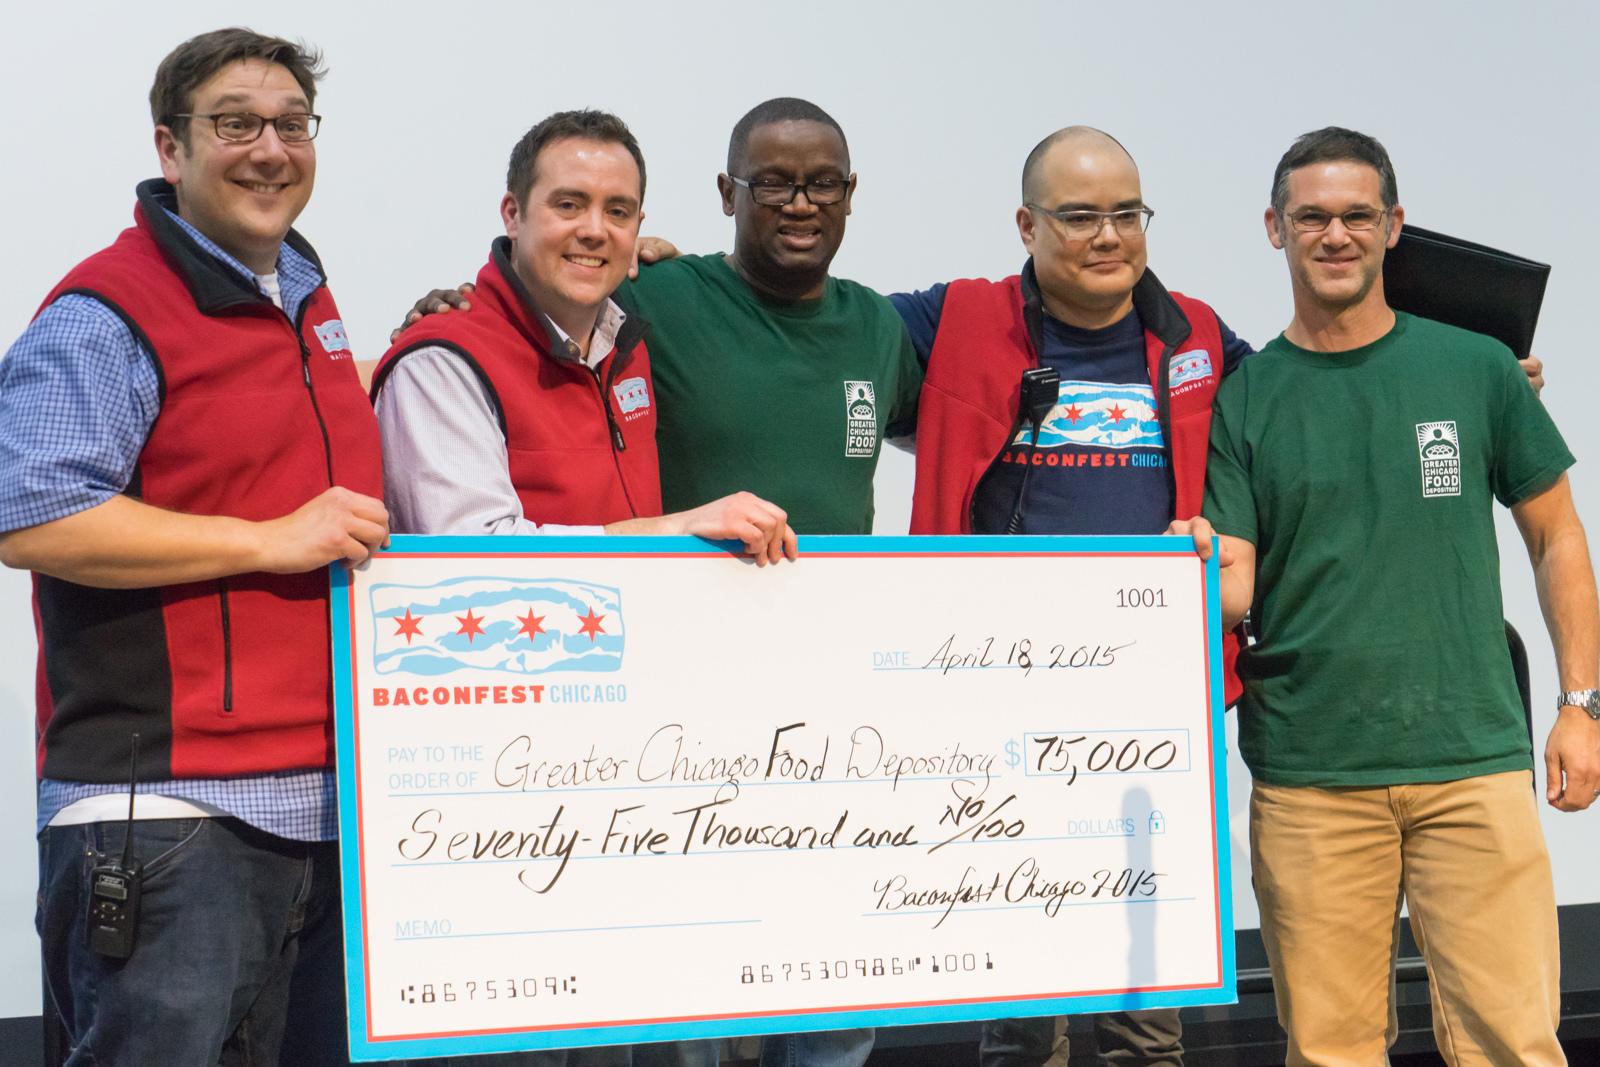 Seth Zurer, left, with his partners Michael Griggs and Andre "vonBaconvitch," donated $75,000 to the Greater Chicago Food Depository last year.